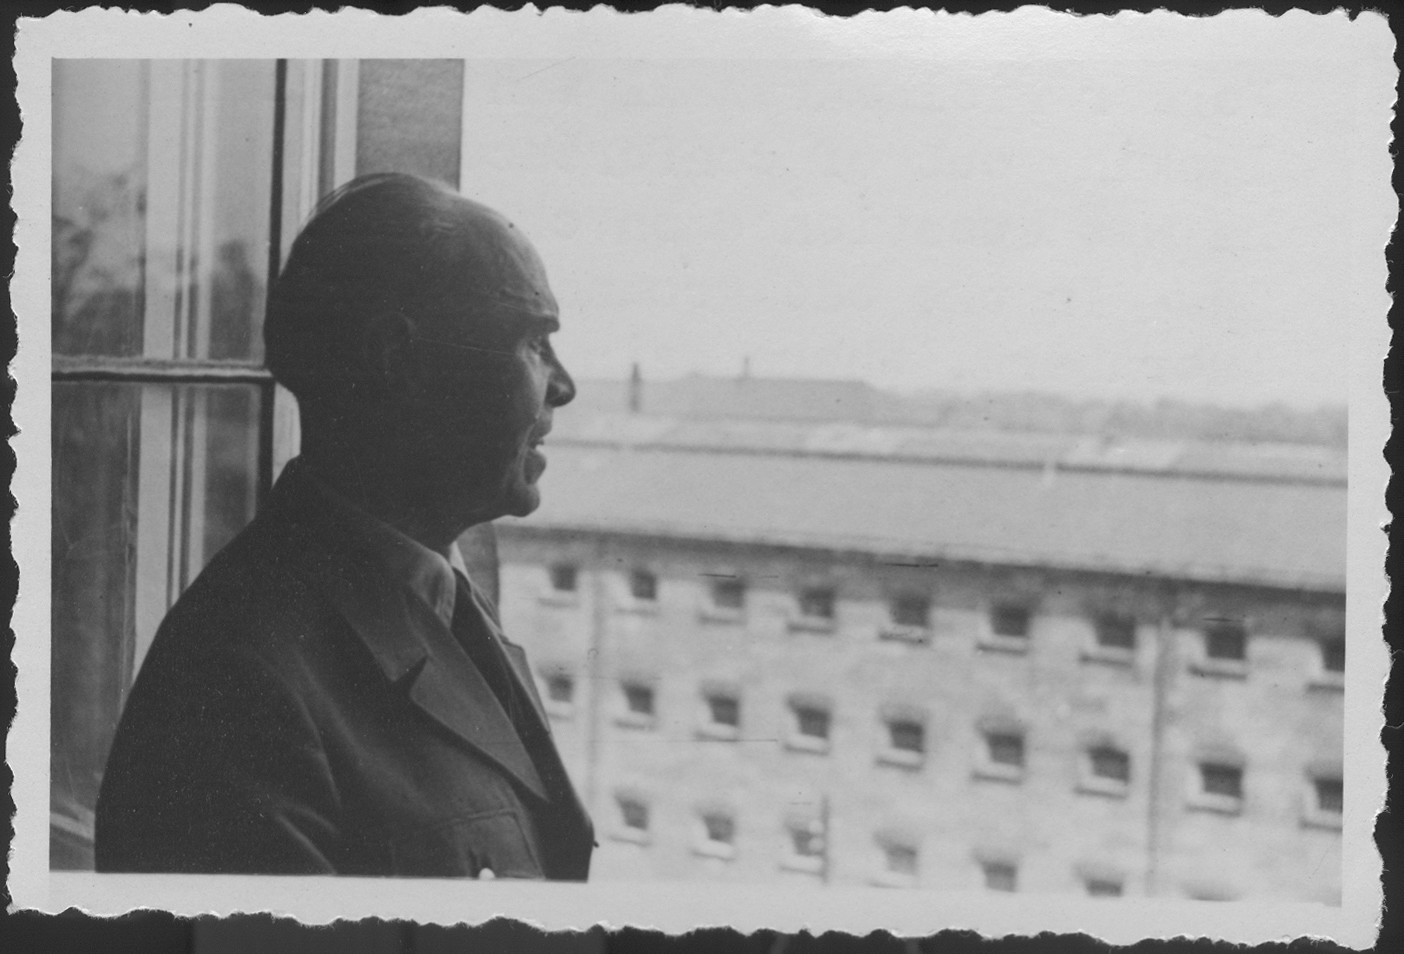 Former German Field Marshall Albert von Kesselring looks out of the window of the conference room where he was being questioned during IMT Nuremberg commission hearings on the Supreme Command of the German Armed Forces, OKW.

In the background is the Nuremberg prison where the IMT defendants were kept during the trial.